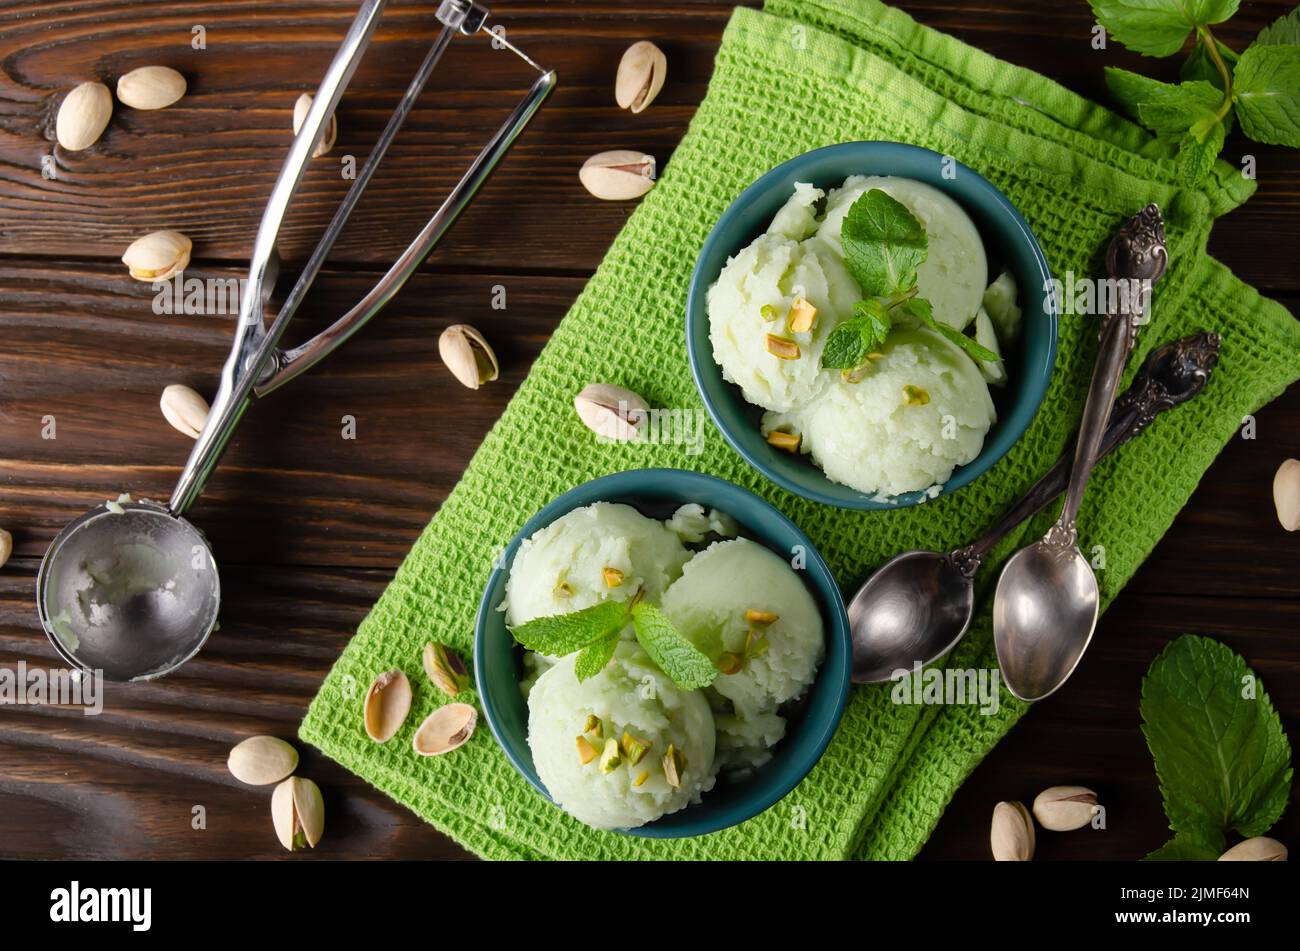 Pistachio icecream balls in clay bowls flat layed on wooden kitchen table with crumbs and nuts aside Stock Photo